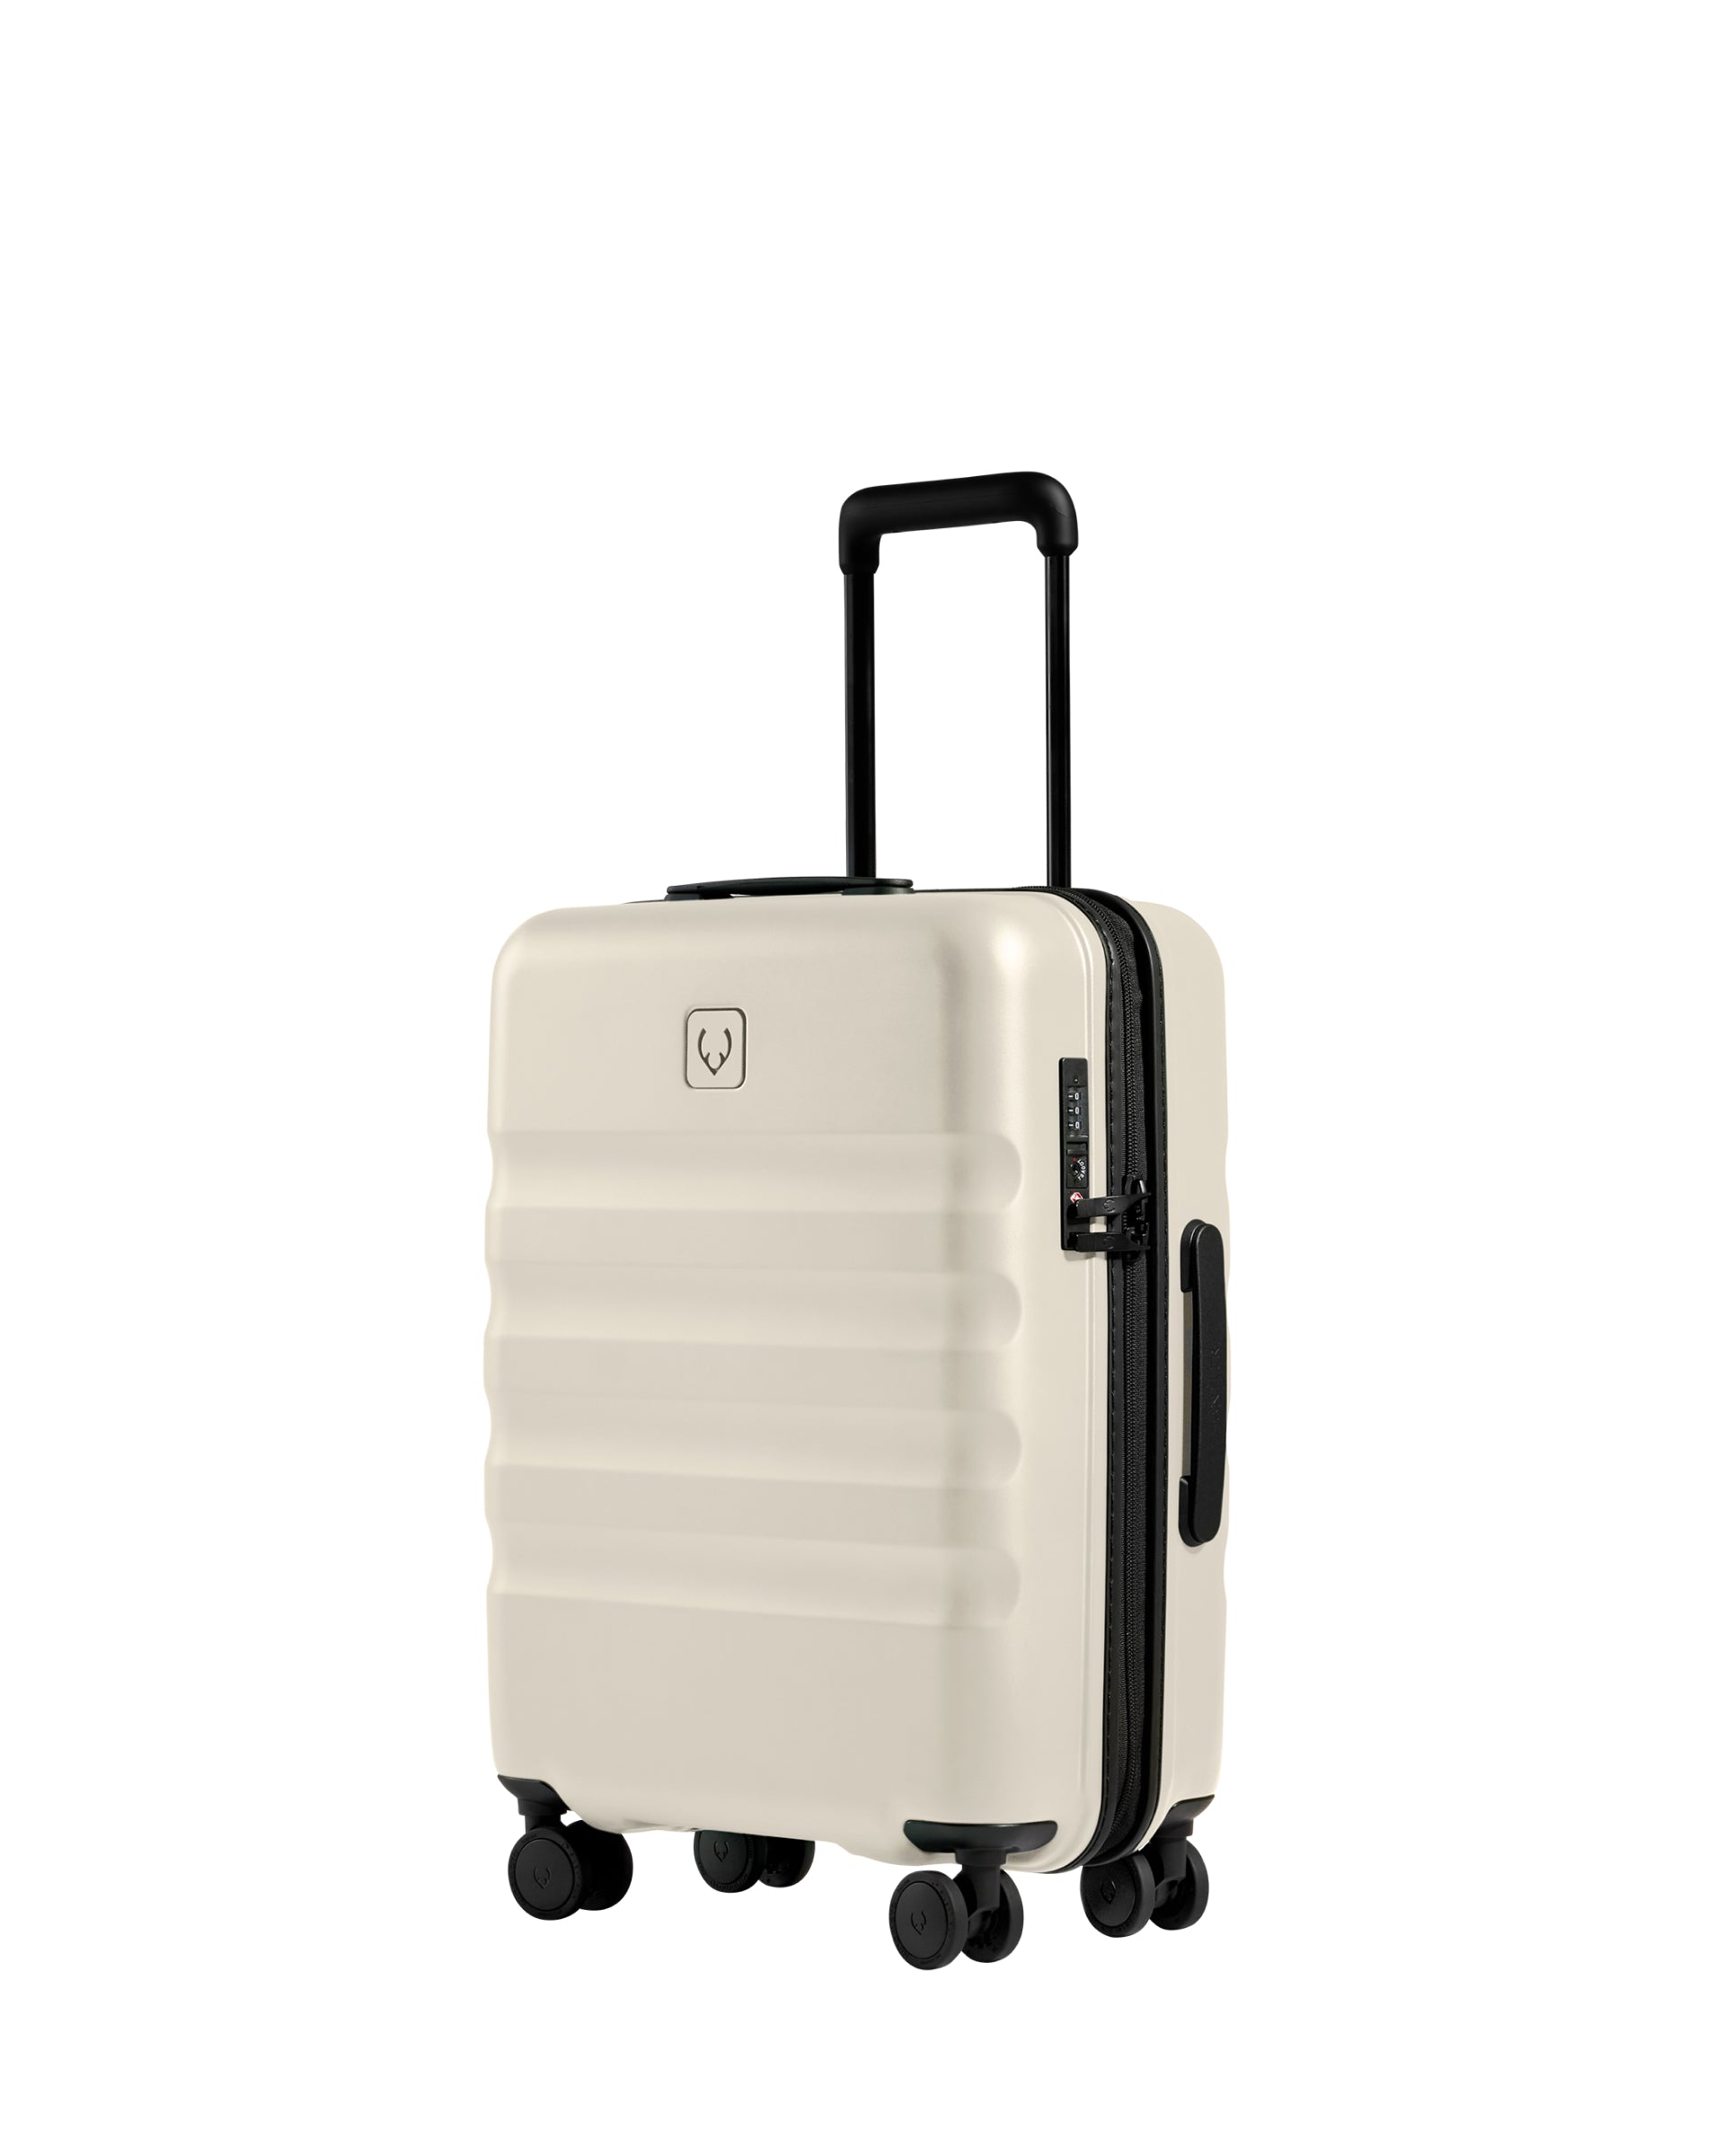 View Antler Icon Stripe Cabin Suitcase In Taupe Size 20cm x 55cm x 40cm information